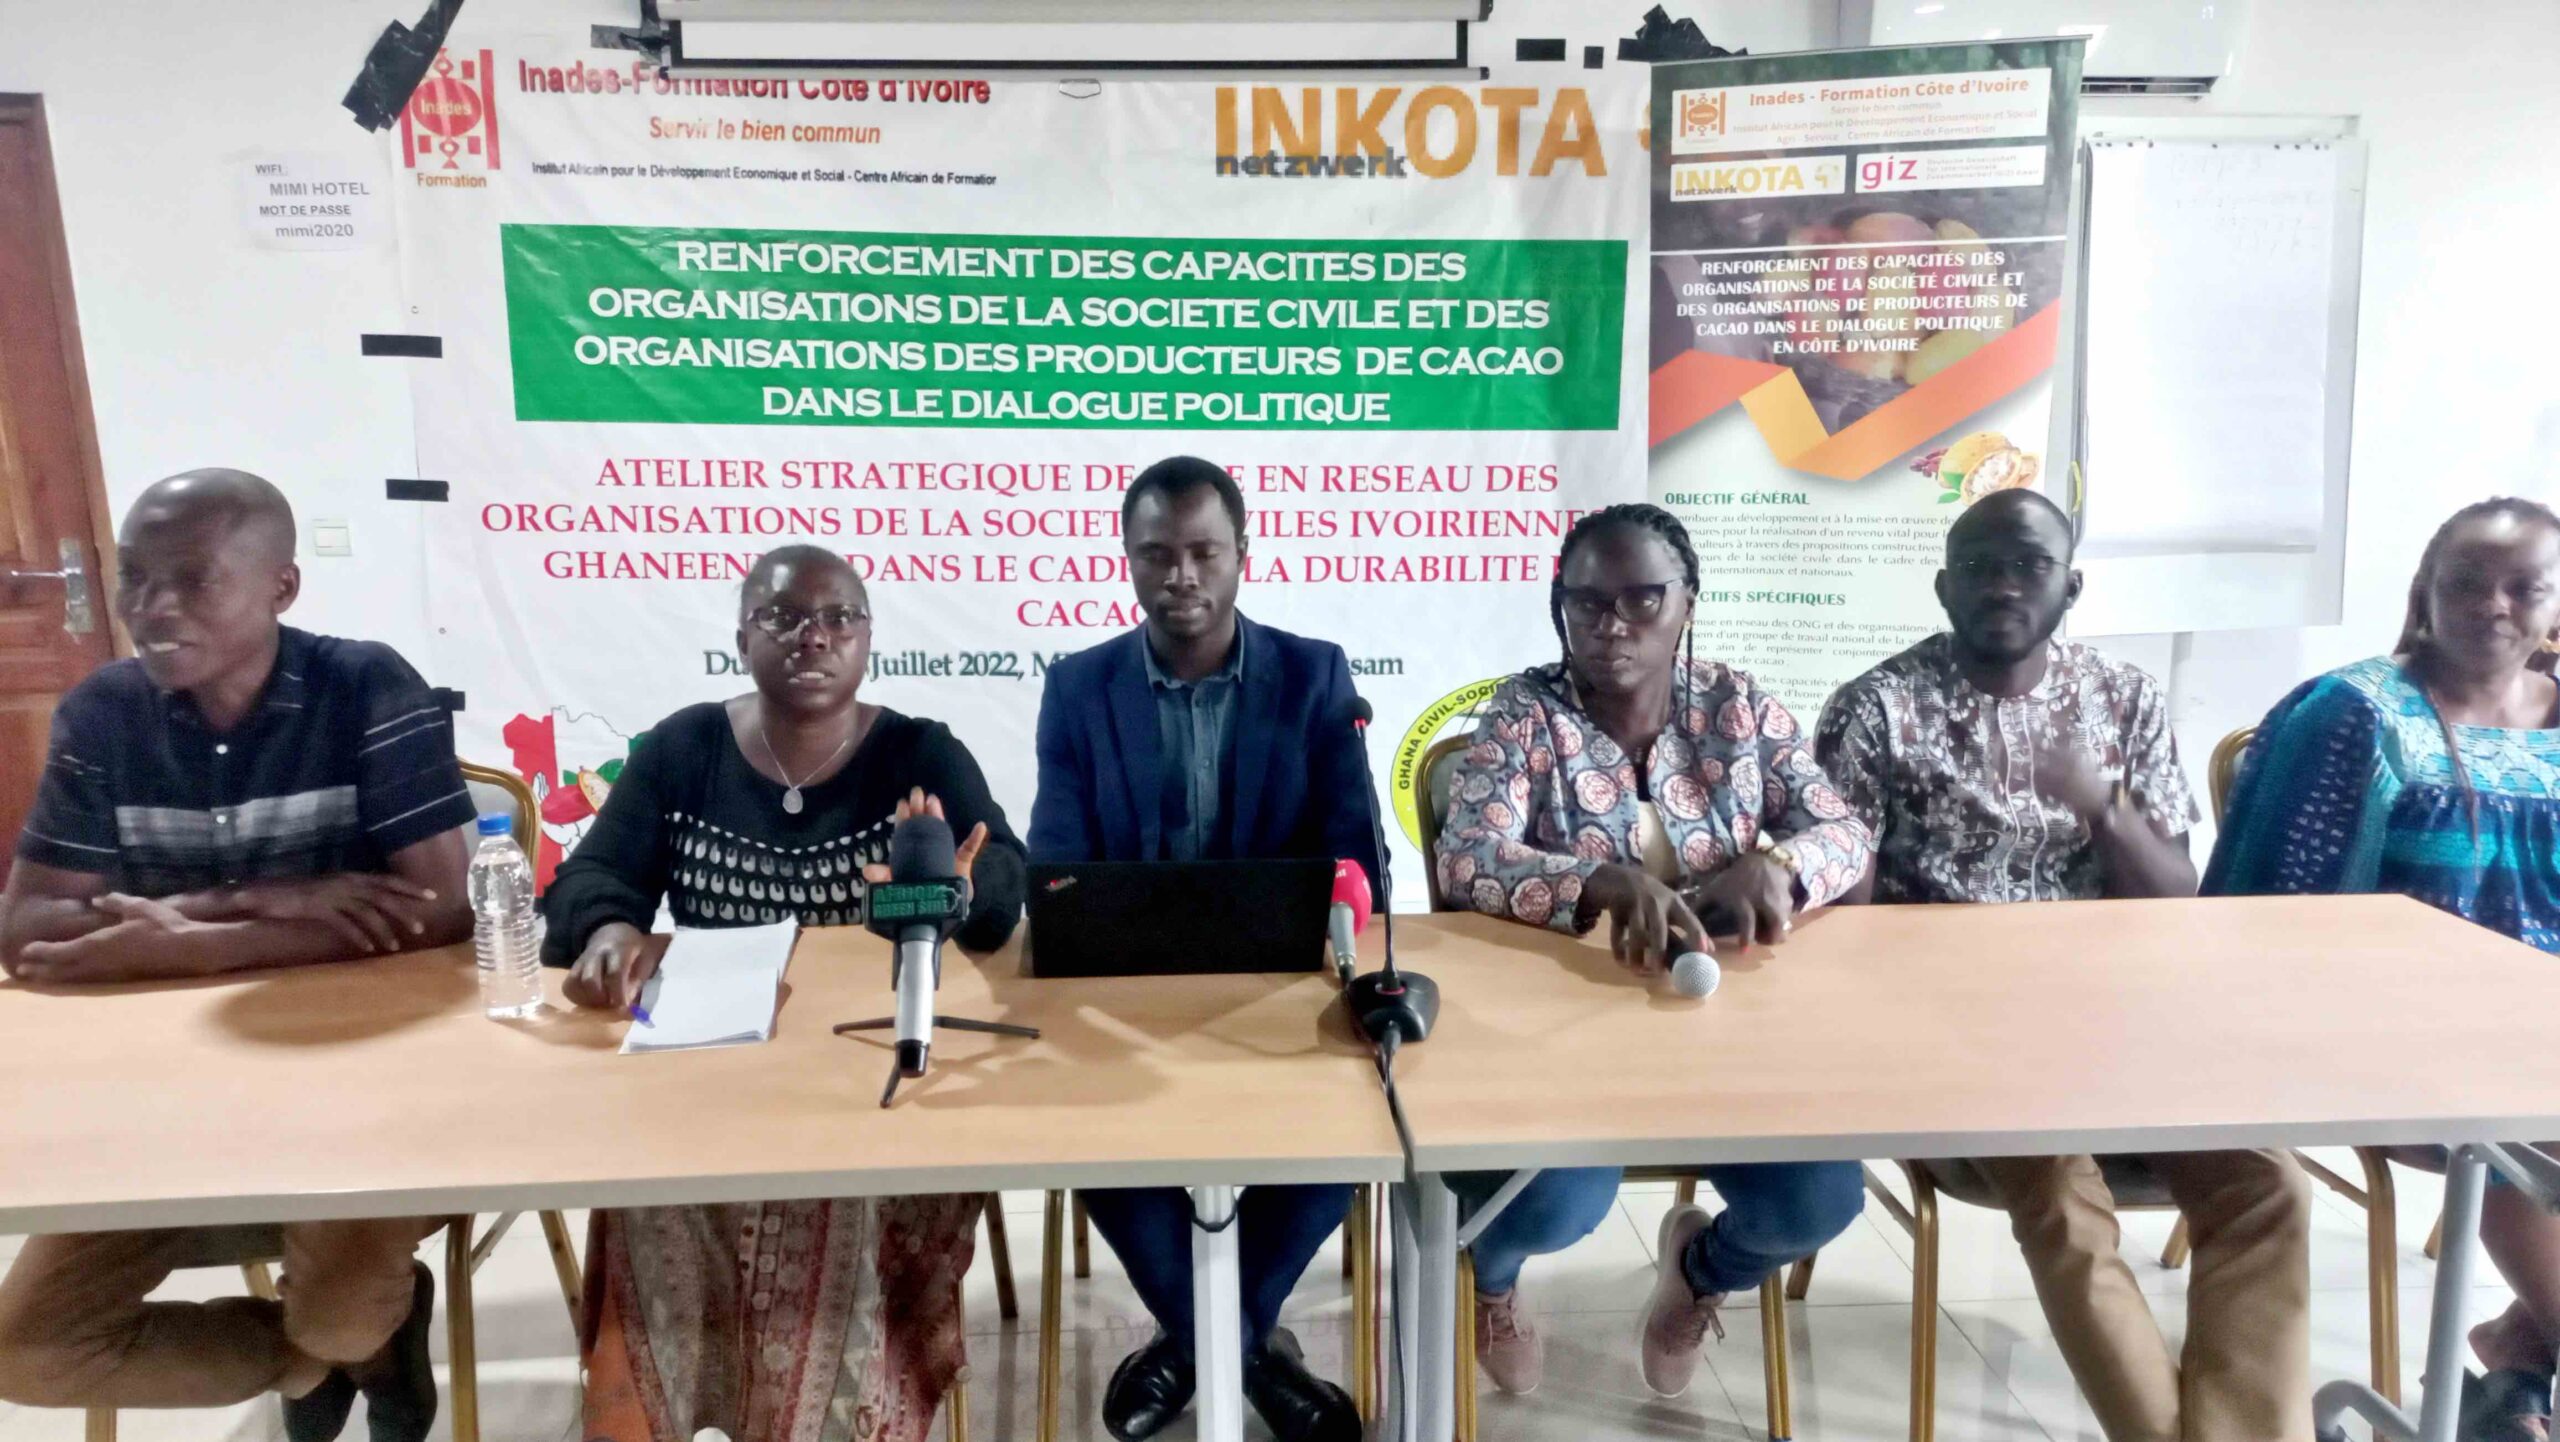 DECLARATION BY CIVIL SOCIETY ORGANISATIONS FROM COTE D’IVOIRE AND GHANA IN THE CONTEXT OF THE SUSTAINABILITY OF THE COCOA SECTOR